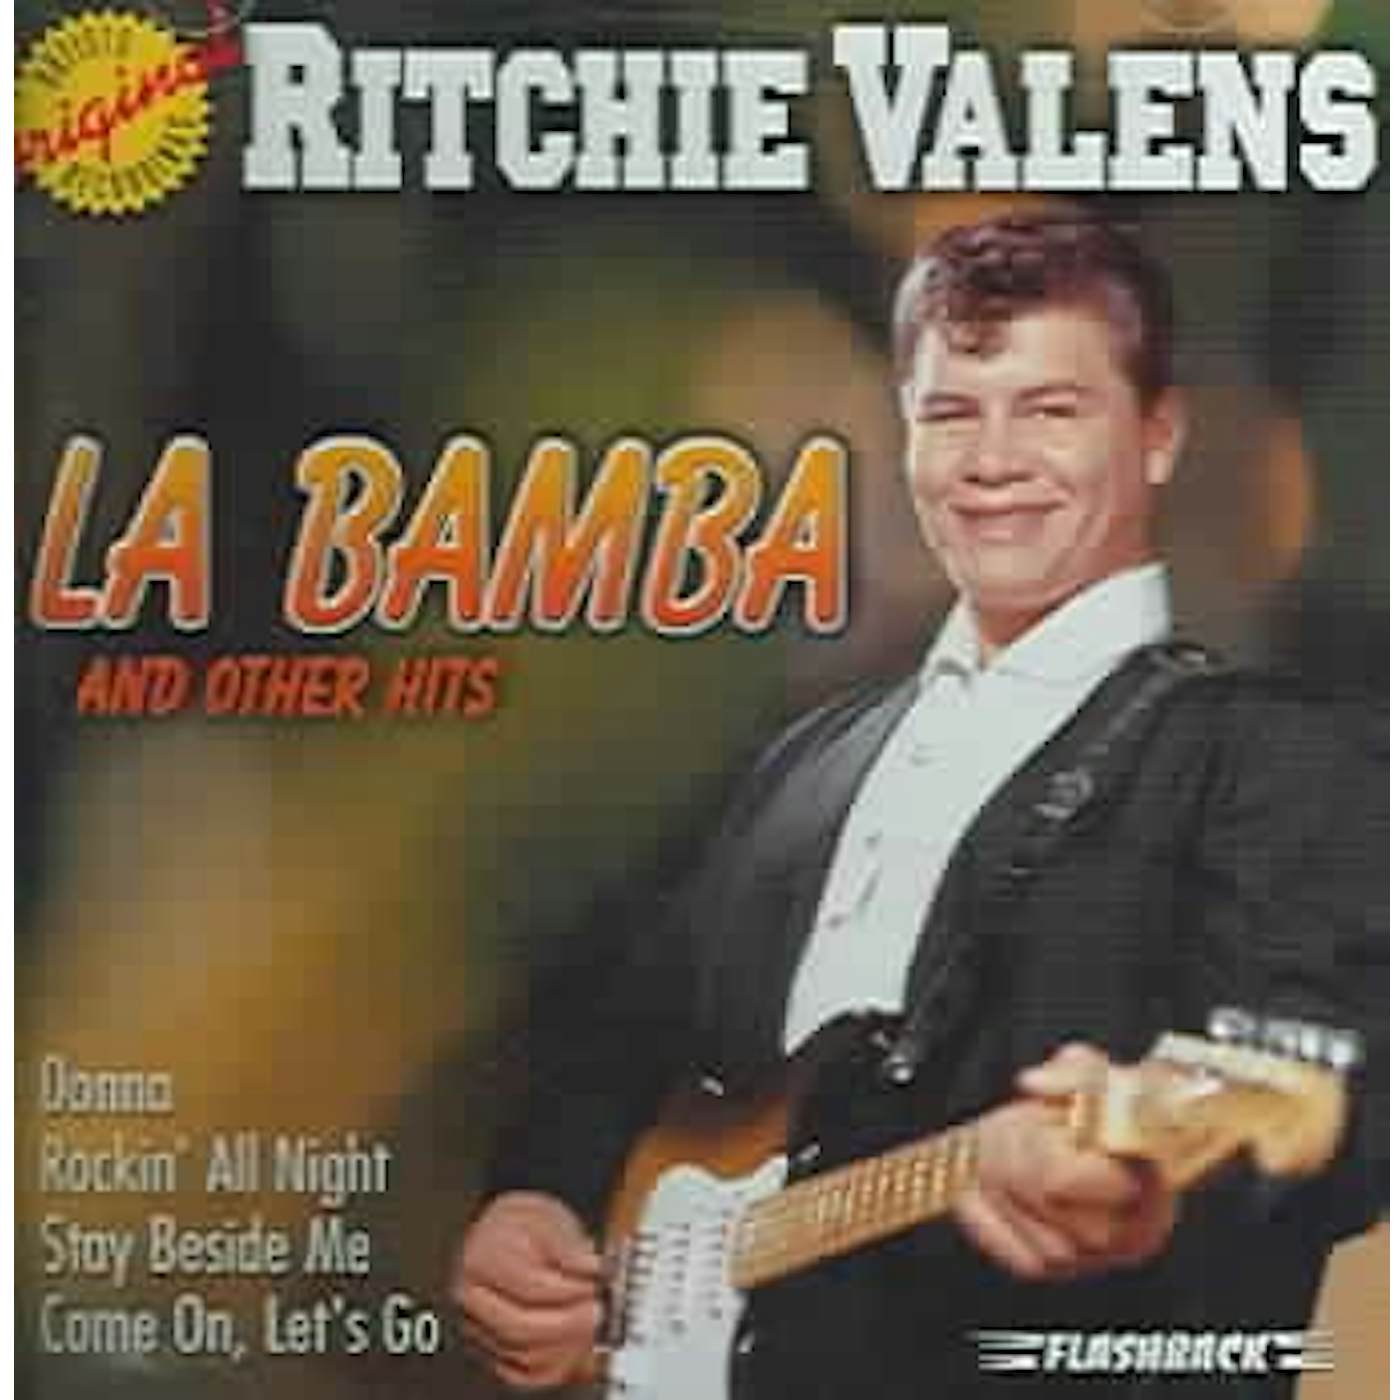 Ritchie Valens La Bamba & Other Hits CD